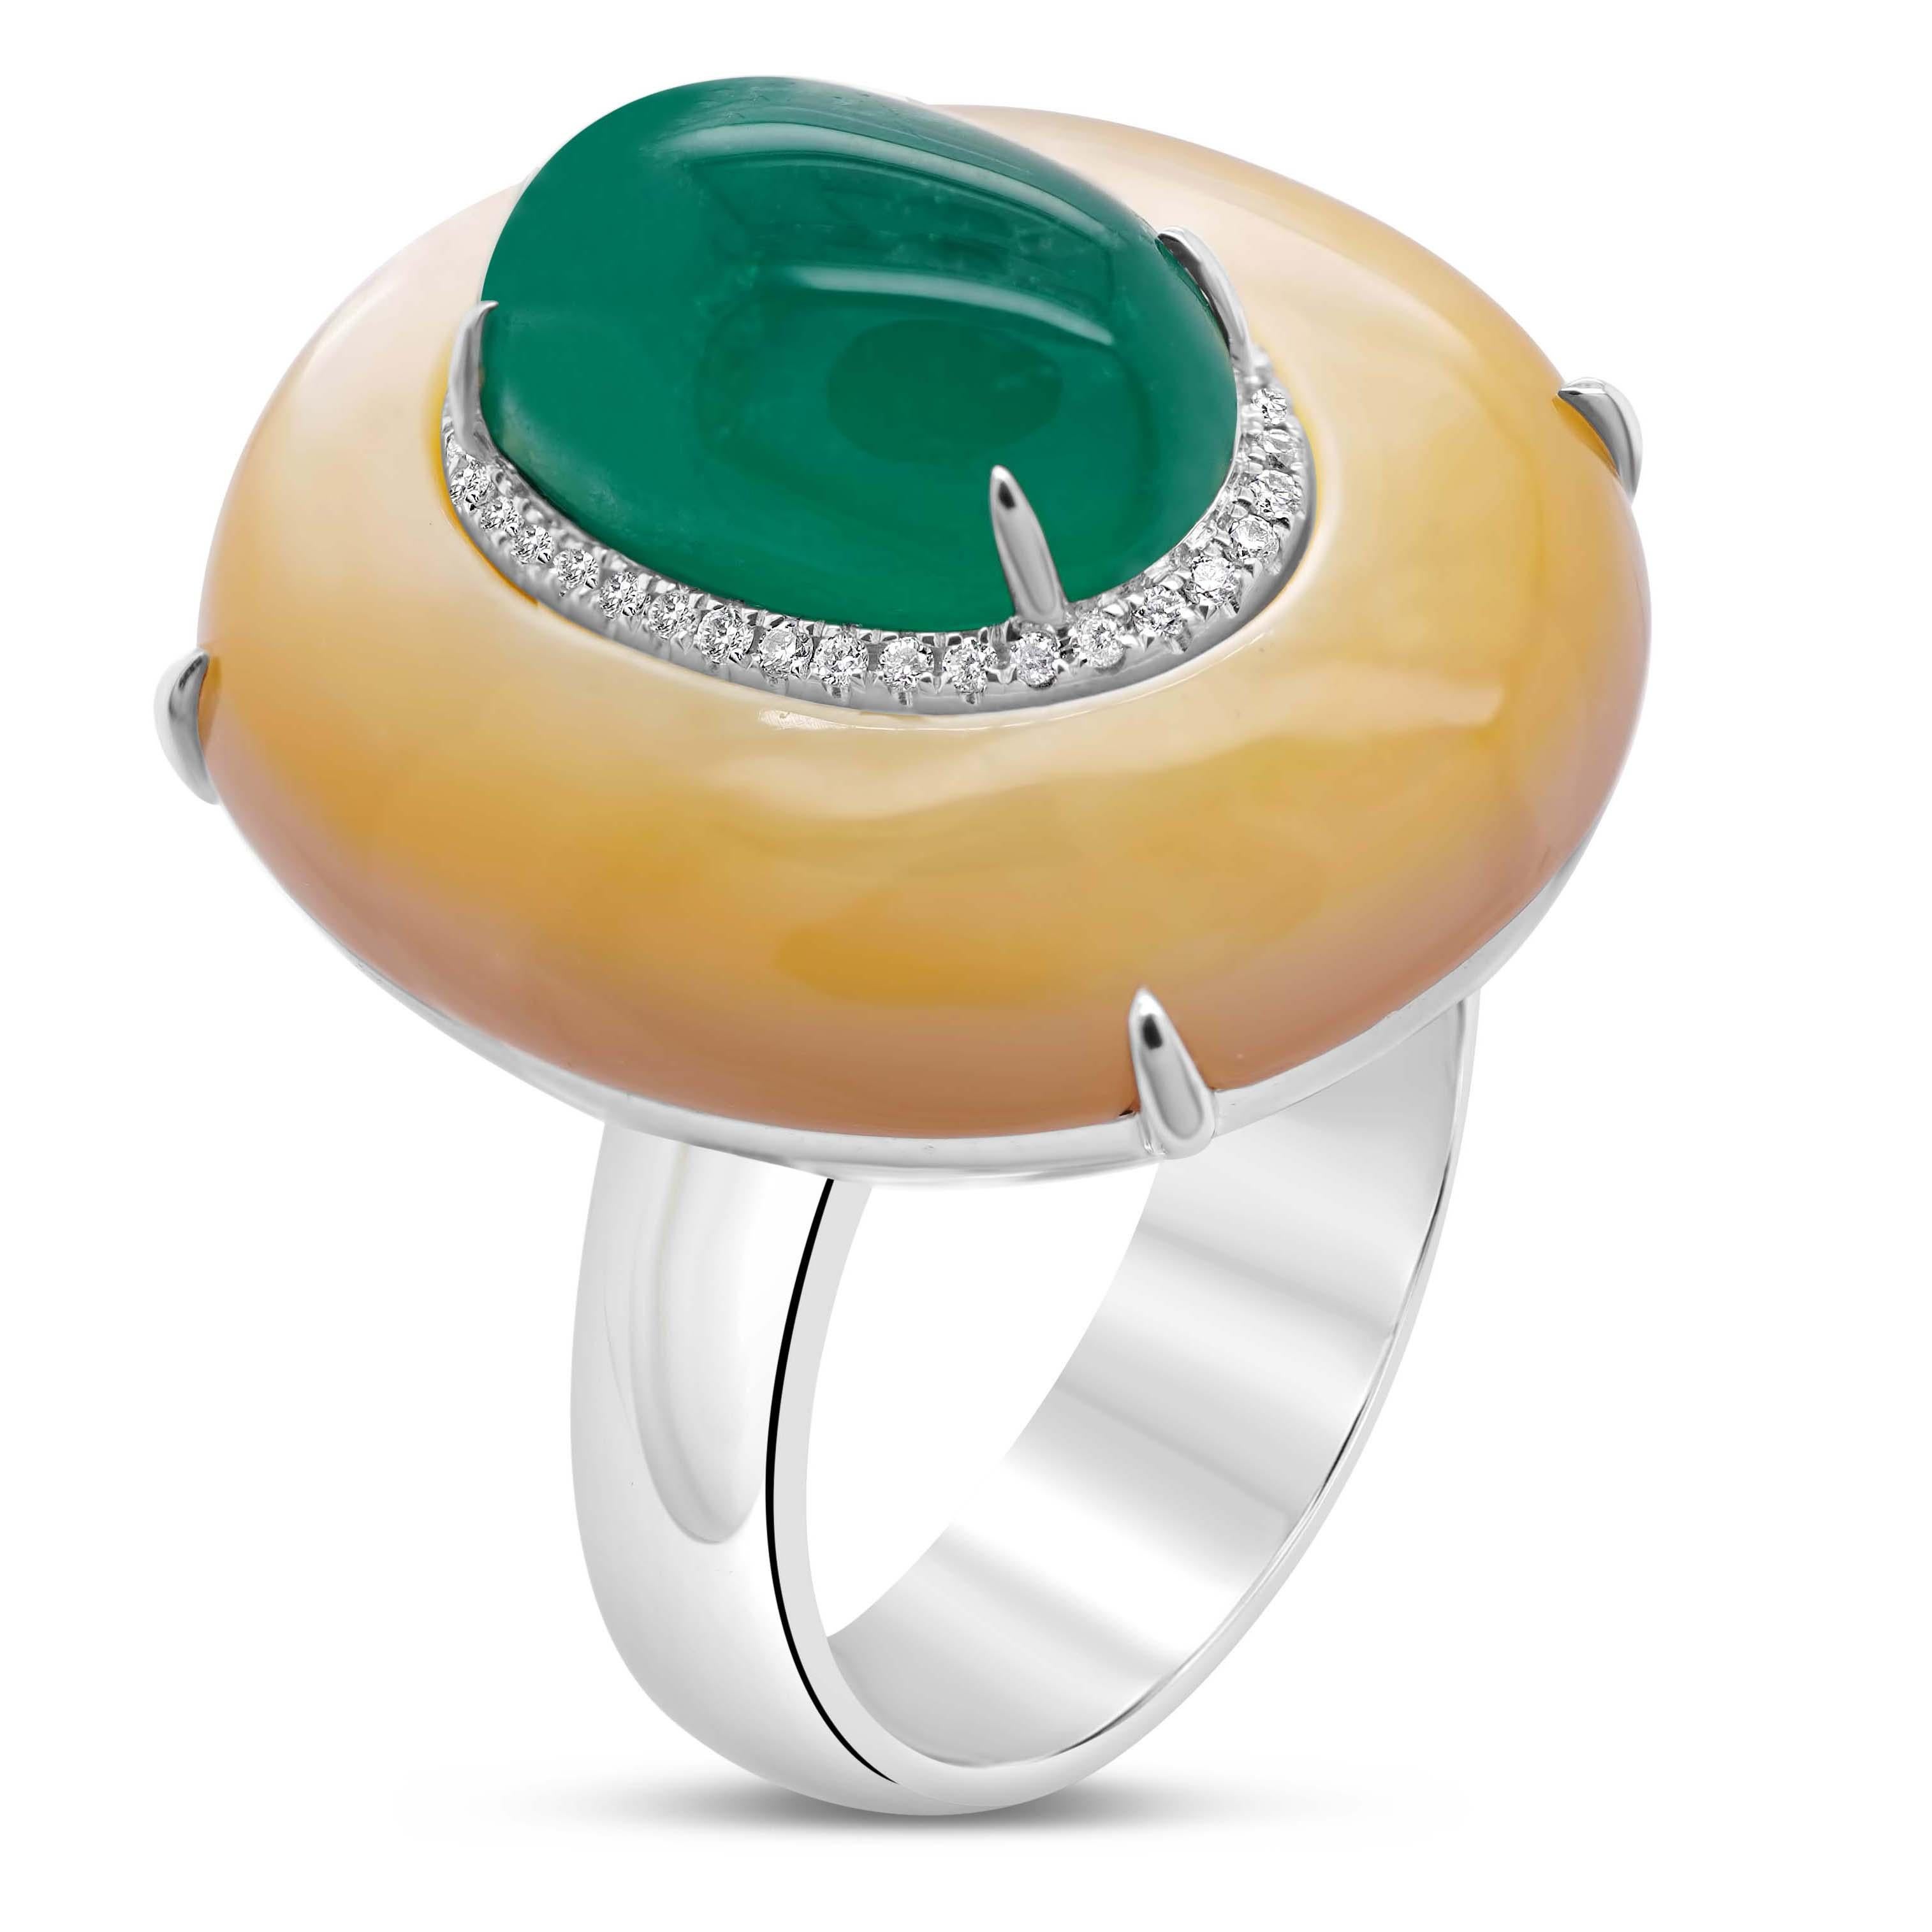 Oval Cut 2.67 Carat Intense Green Emerald Encrusted Yellow Shell 18K White Gold Ring